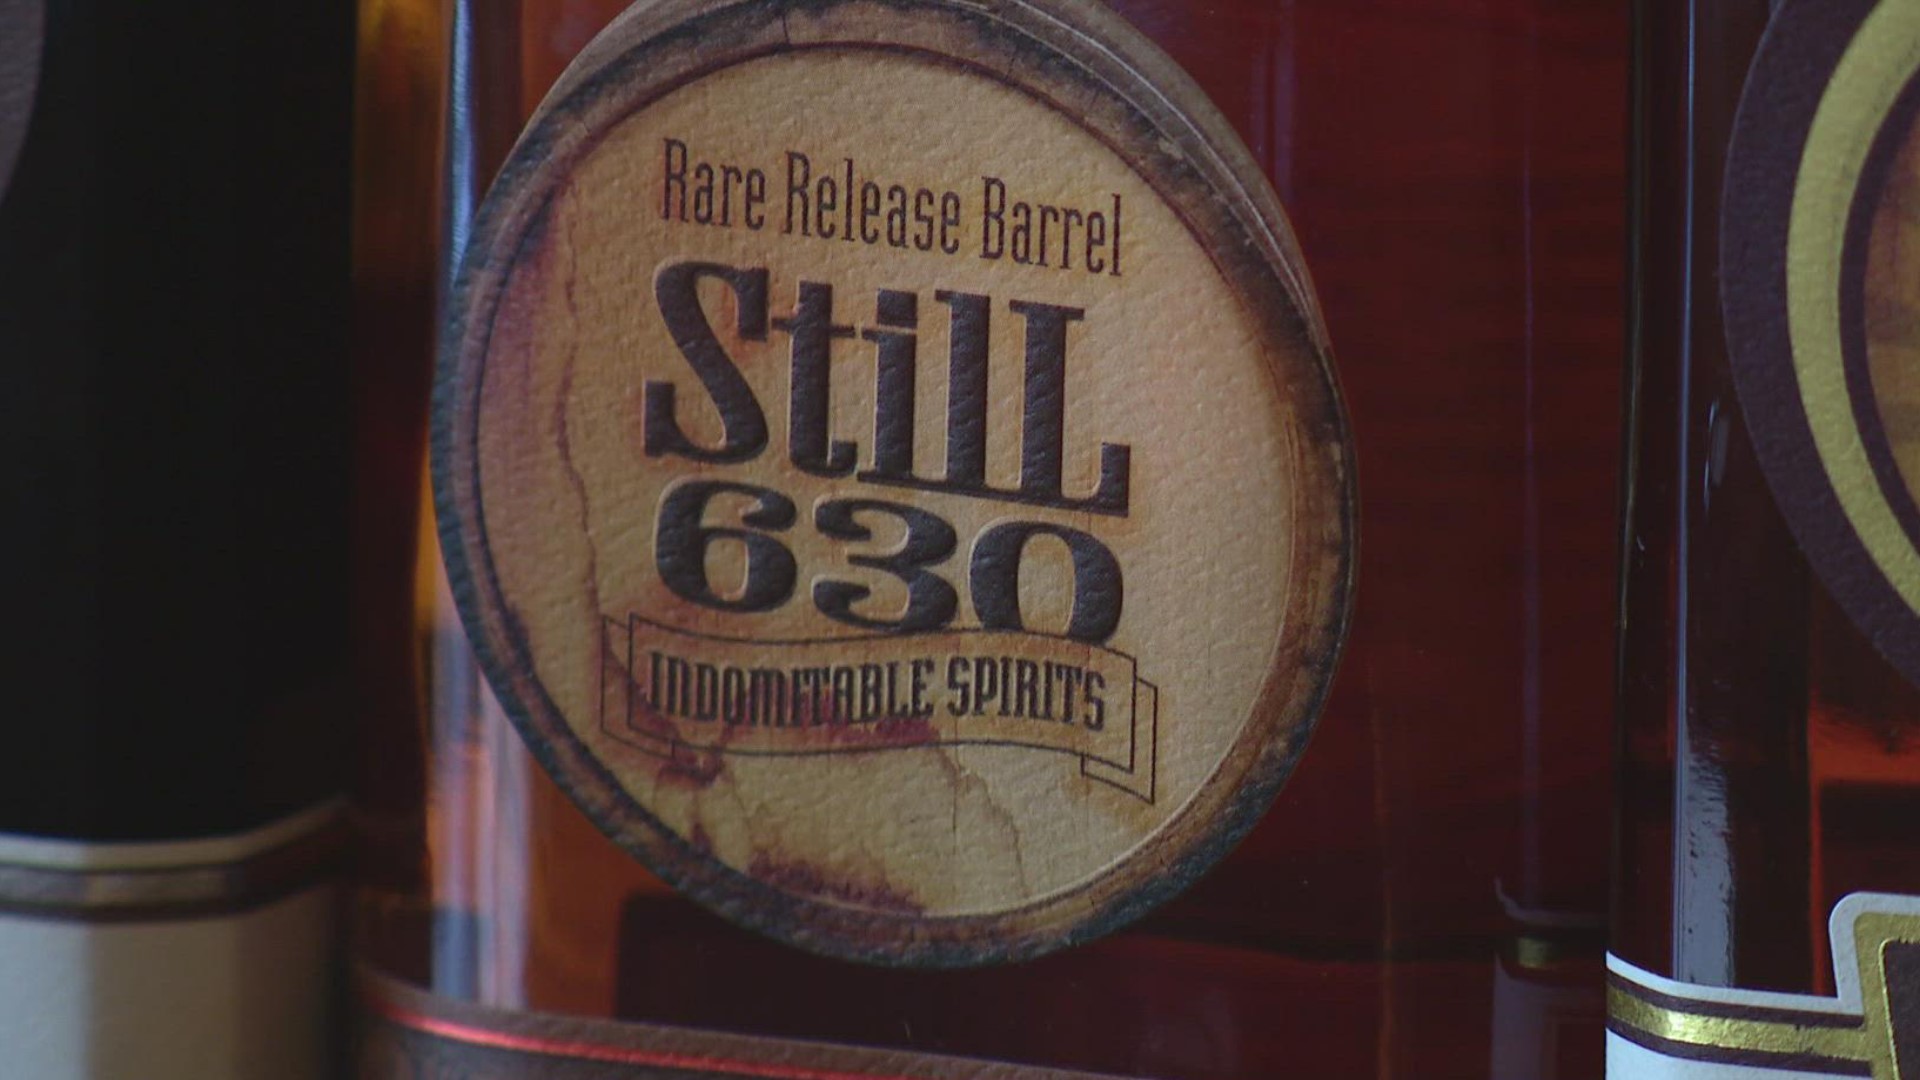 A local man is living his dream making whiskey at his distillery in downtown St. Louis. Here’s what you need to know about StilL 630.